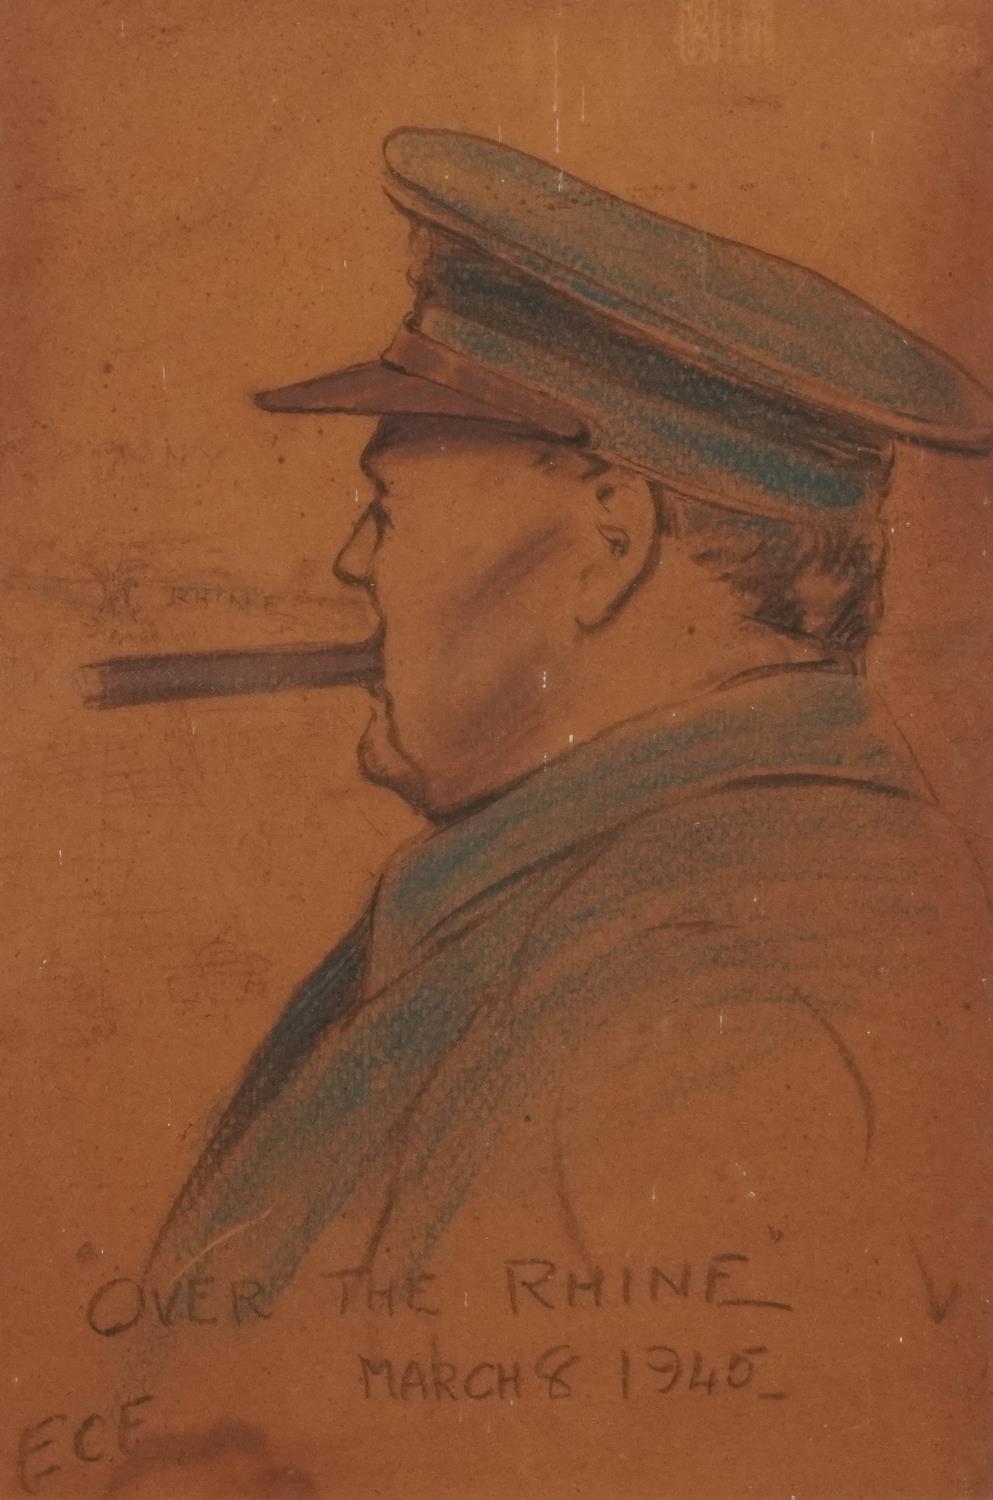 E C F - Winston Churchill, Over the Rhine, March 8th 1945, charcoal and crayon sketch, mounted and